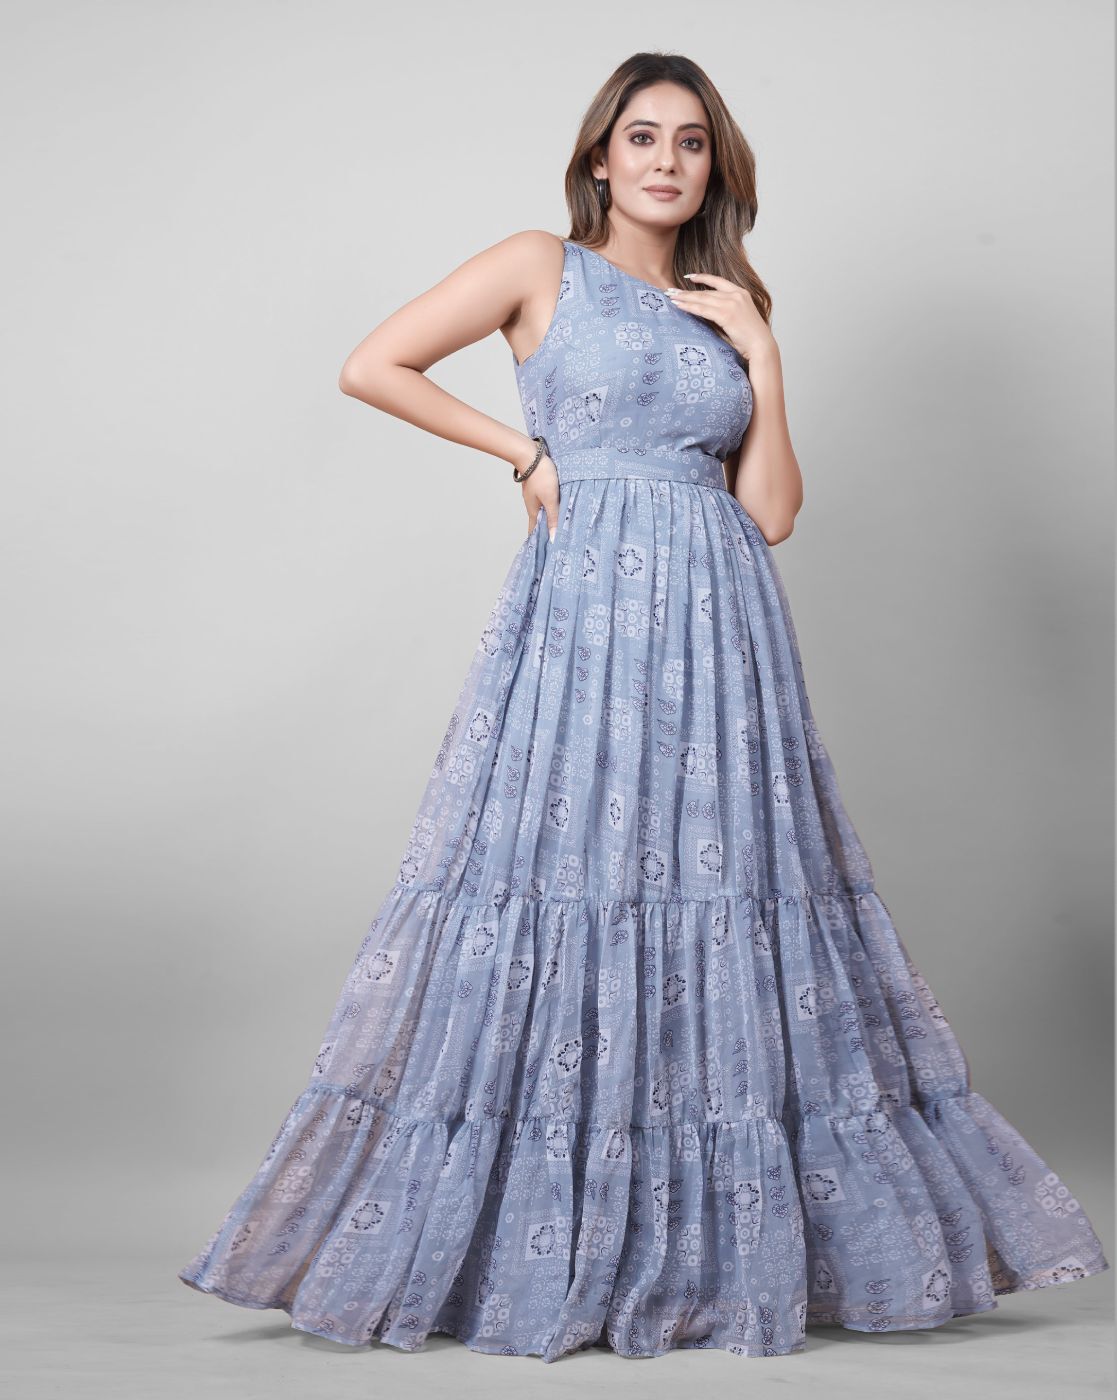 Plus-Sized Silver Dresses, Gray Dresses in Plus Sizes